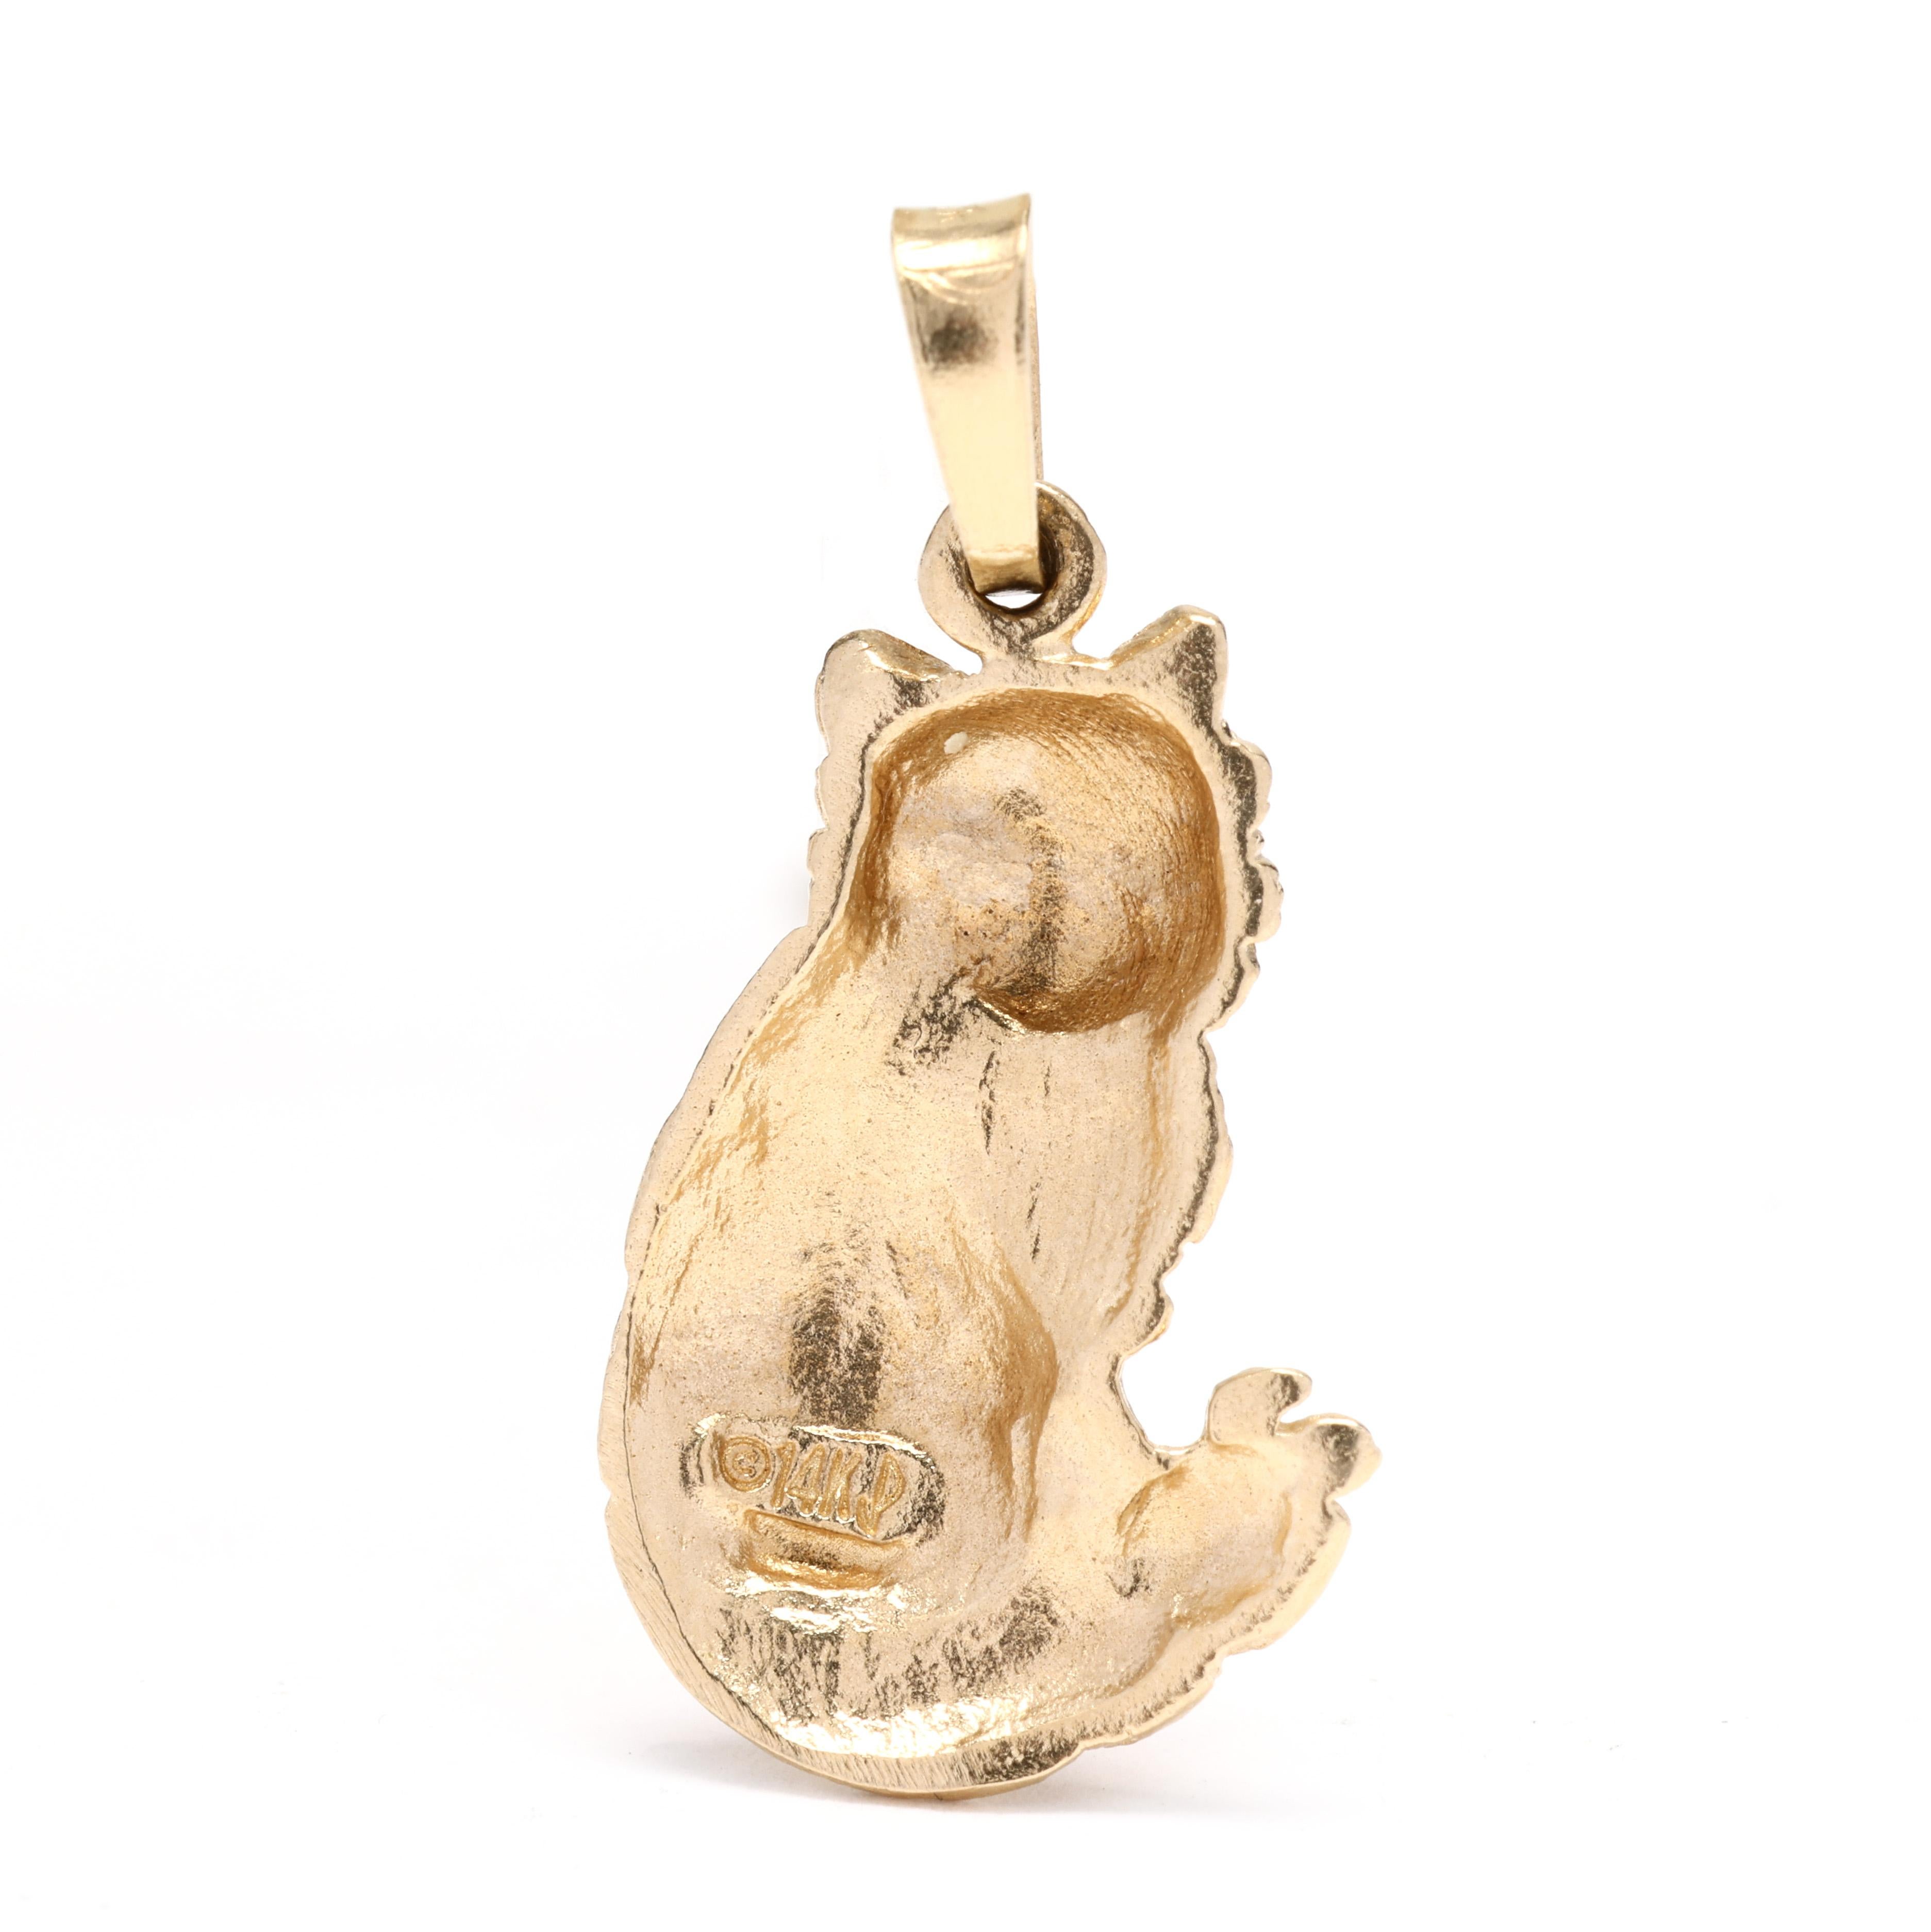 Show your love for cats with this adorable 14k yellow gold cat charm. This charm is perfect for animal lovers and makes a whimsical addition to any jewelry collection. The charm measures 1 inch in length, making it a substantial and eye-catching